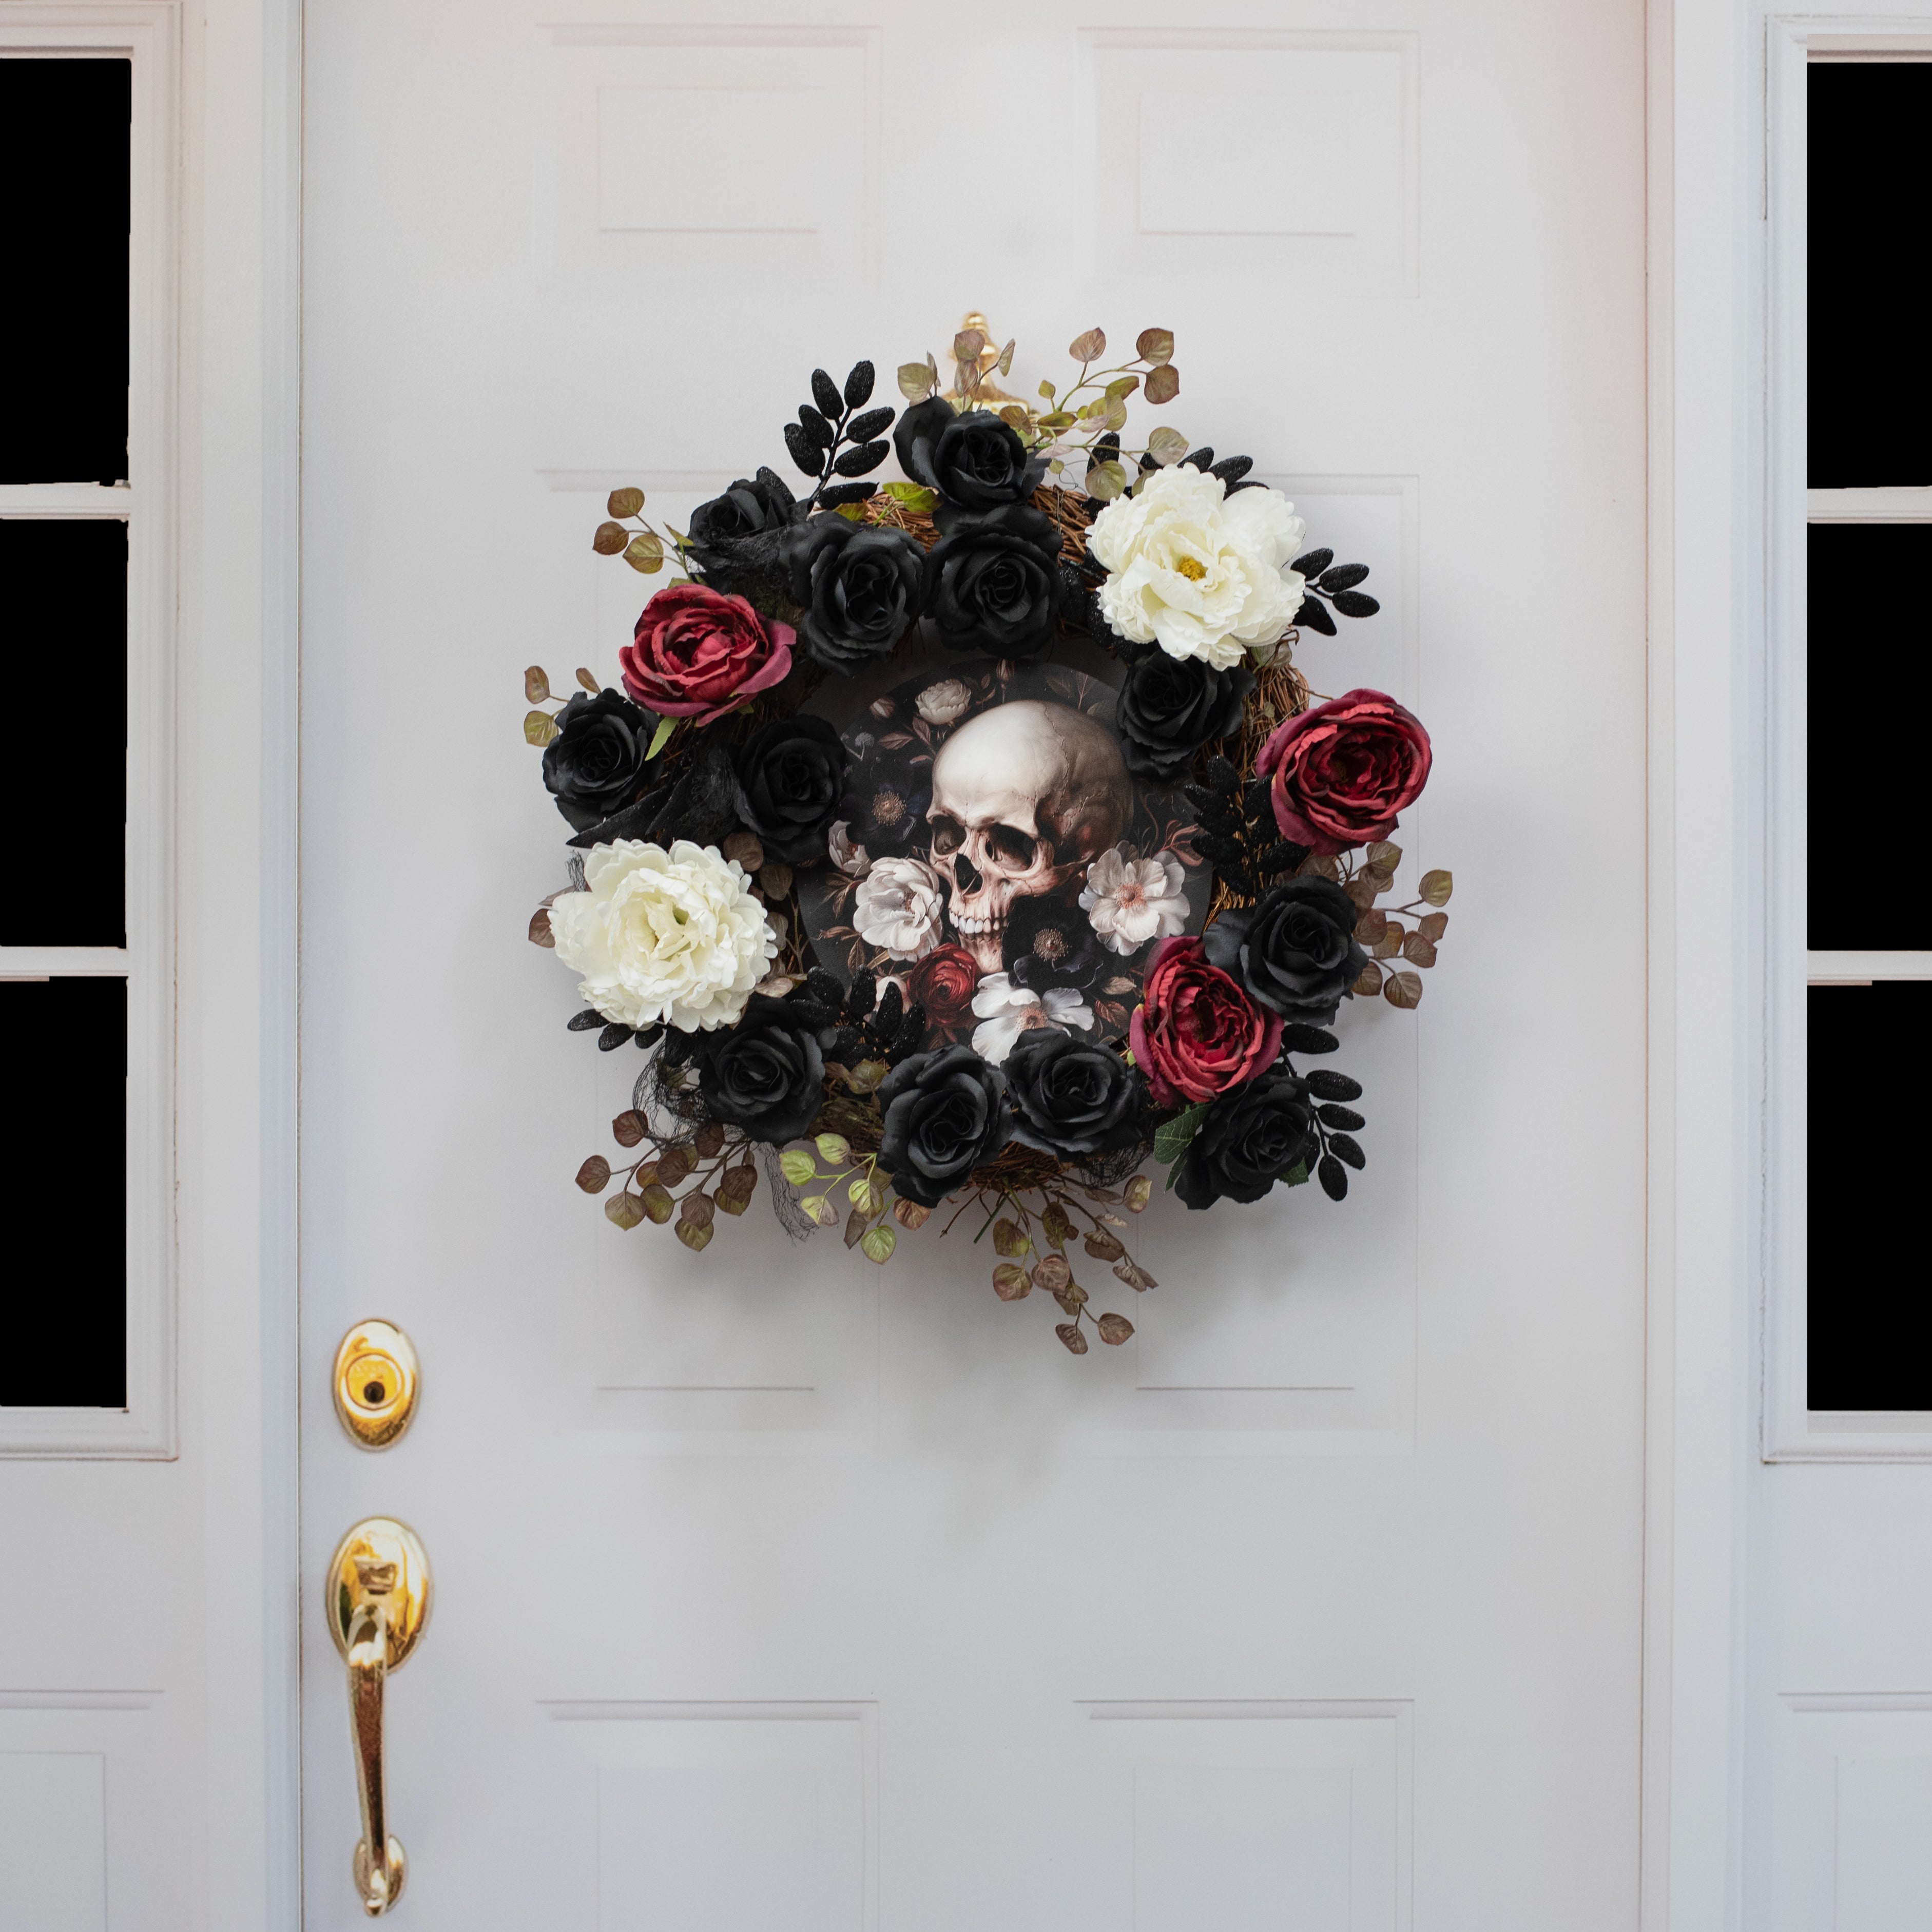 10.5" Round Waterproof Sign: Black, White & Red Floral Skull